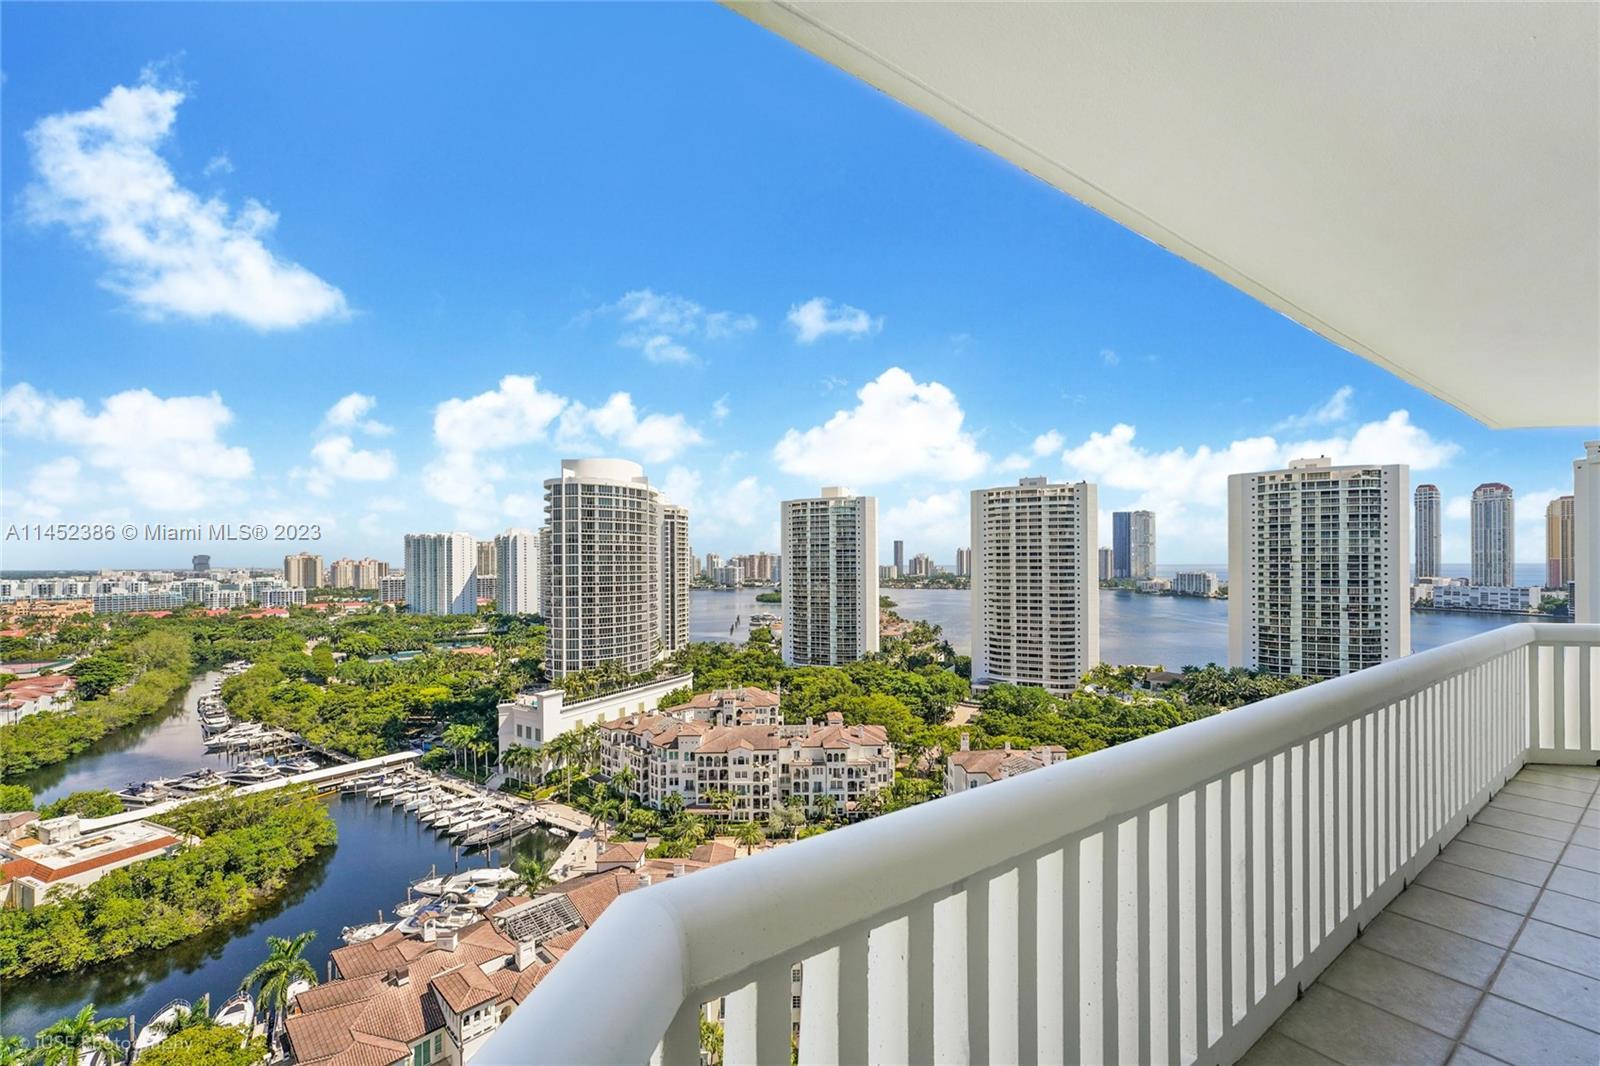 Experience the luxury lifestyle of Williams Island. Offering a coveted 4,050 SQ FT corner unit with 